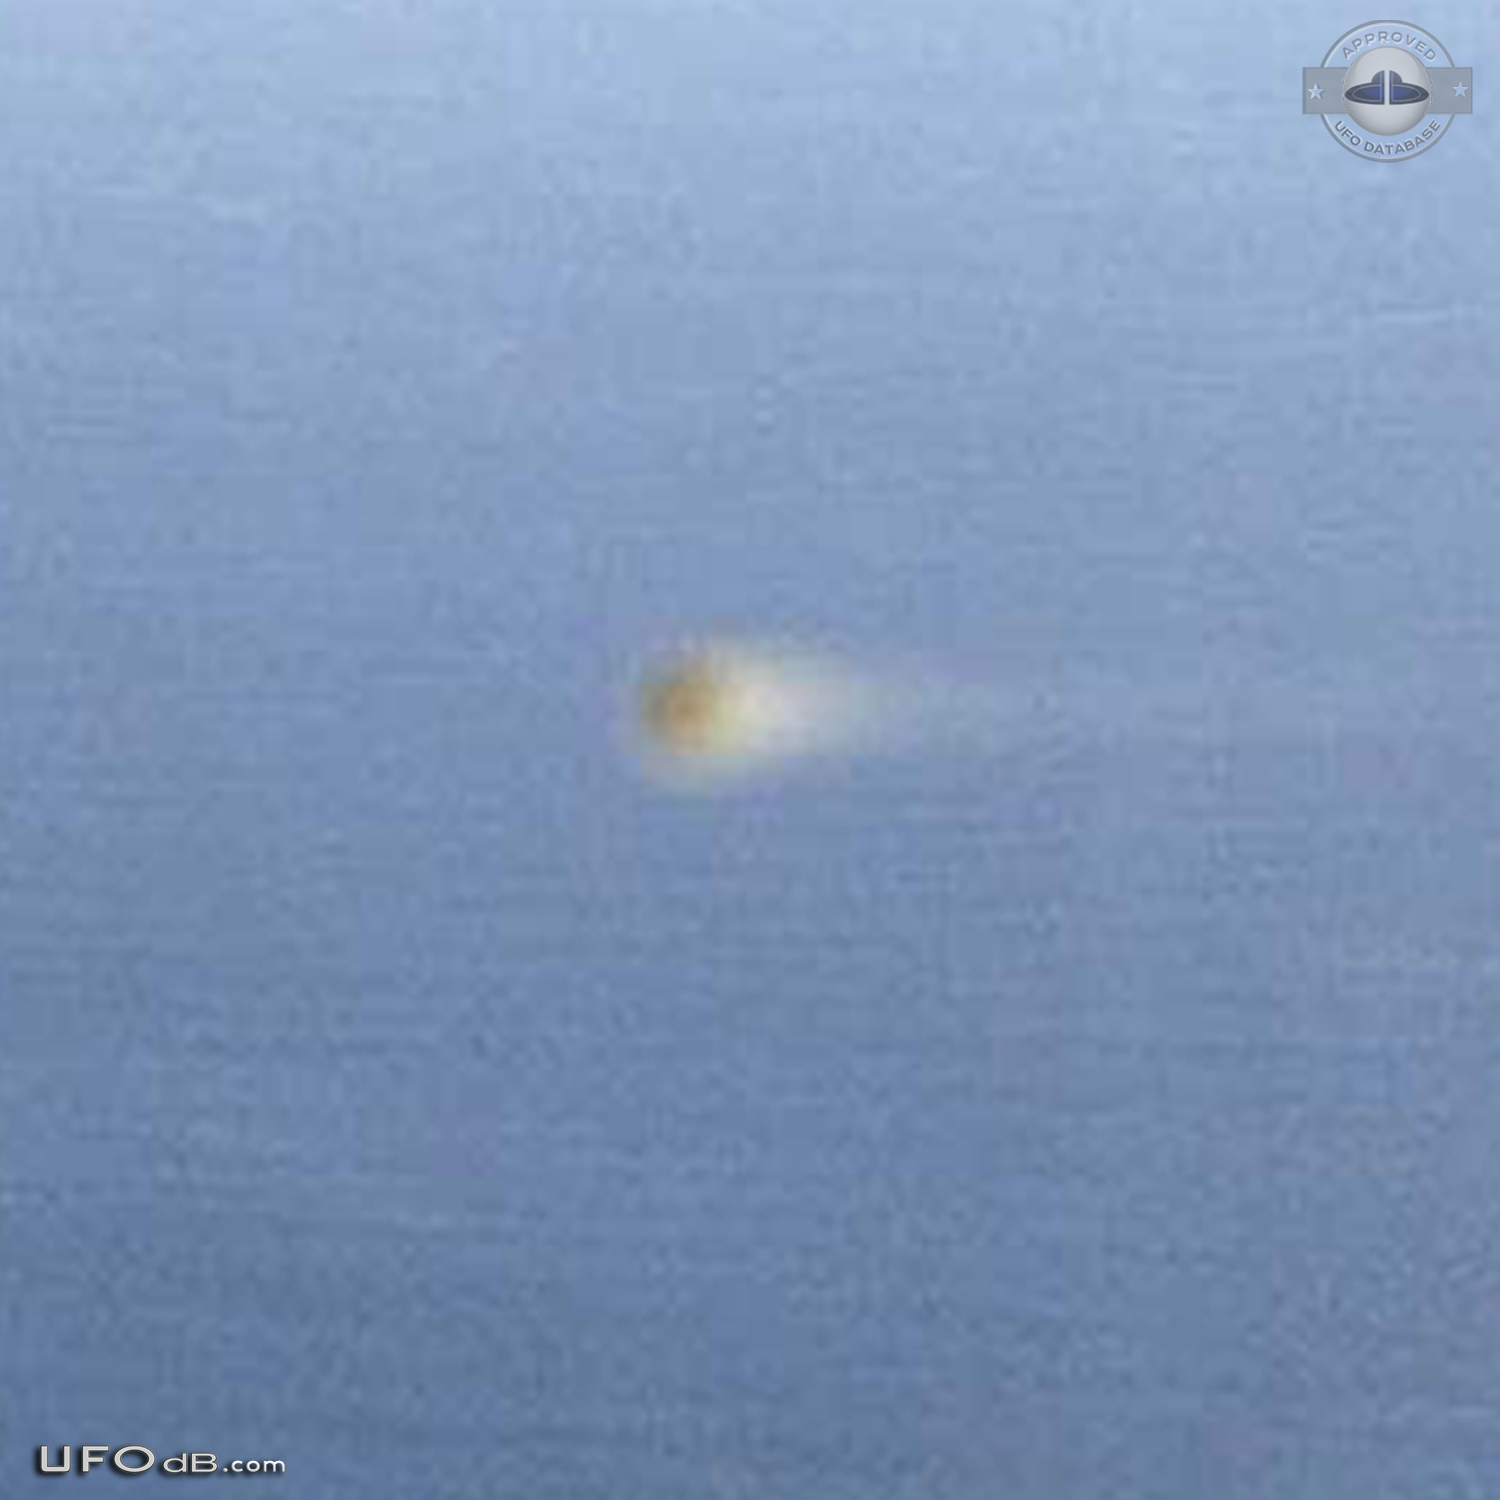 Sphere UFO with smoking tail seen near Table mountain, Cape Town 2004 UFO Picture #456-4